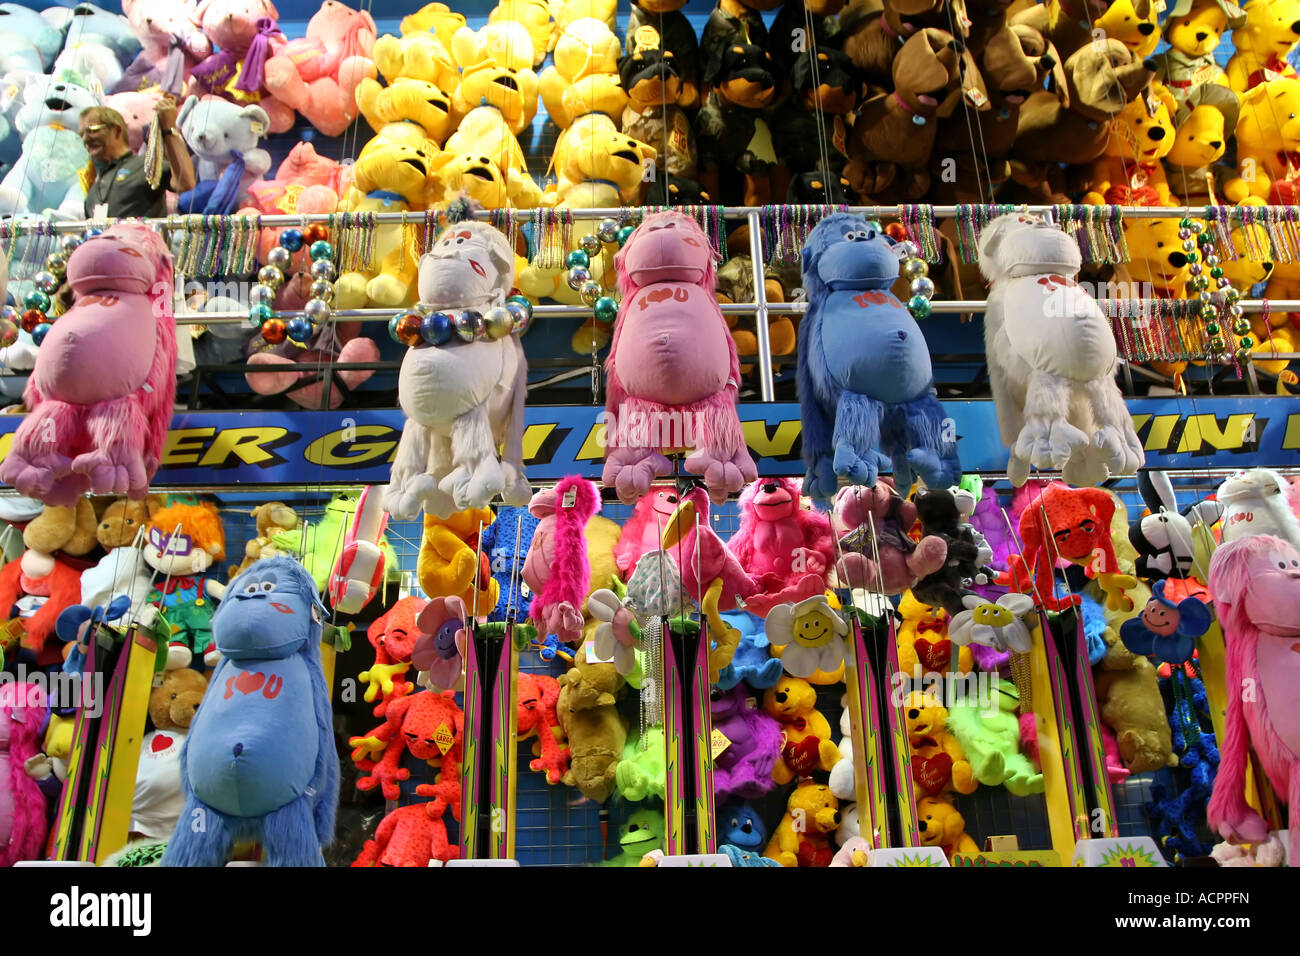 Prize Stuffed Animals Carnival Game 